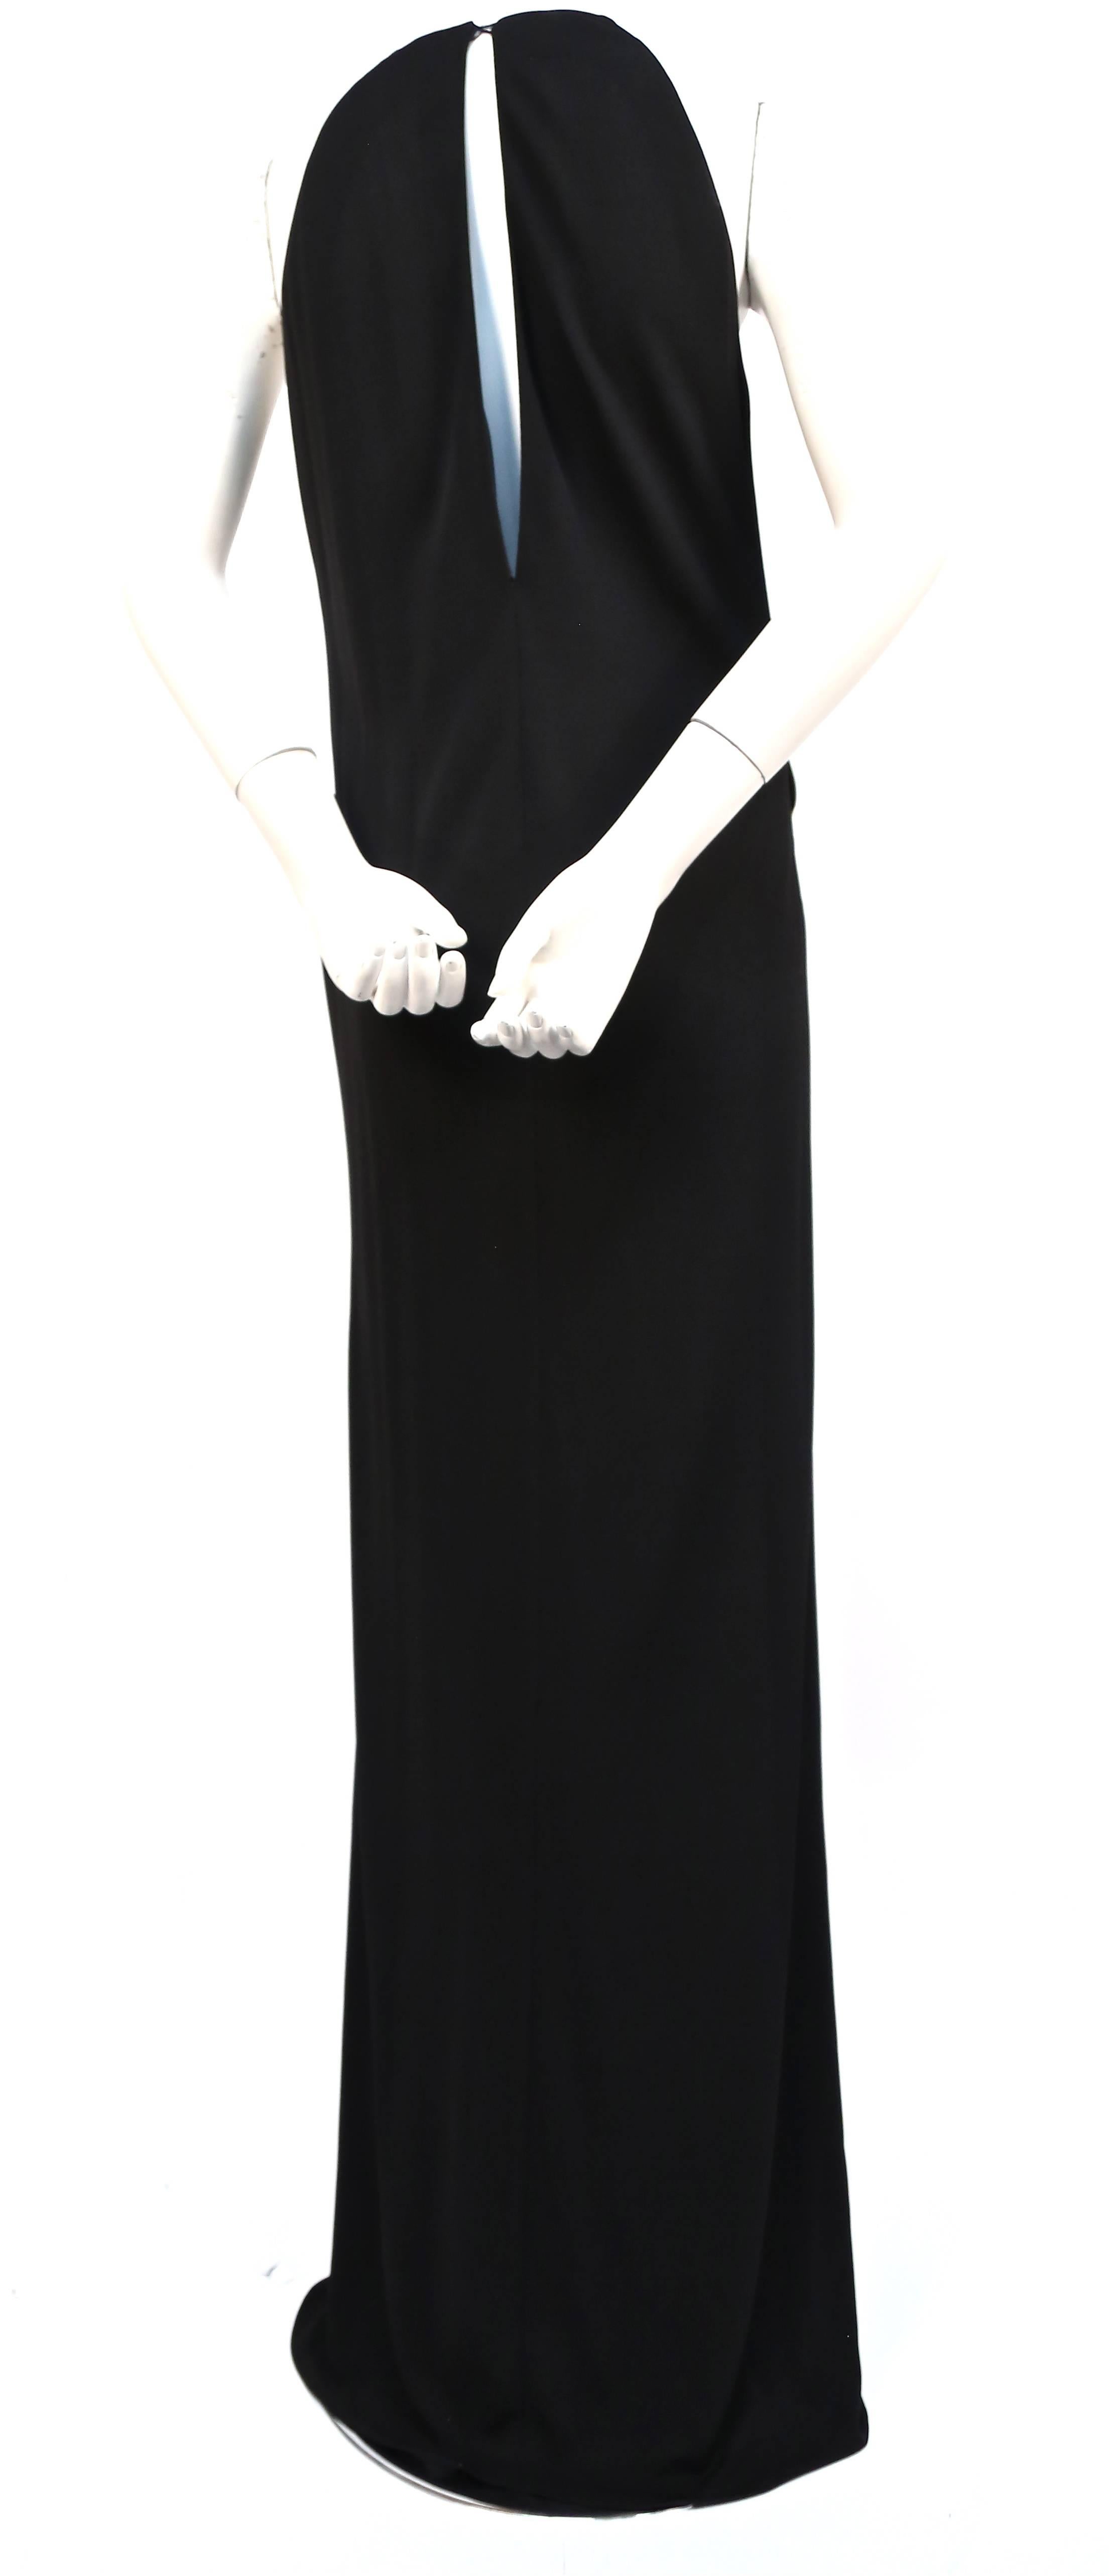 Black Tom Ford for Gucci black jersey gown with gold belt buckle, 1996 